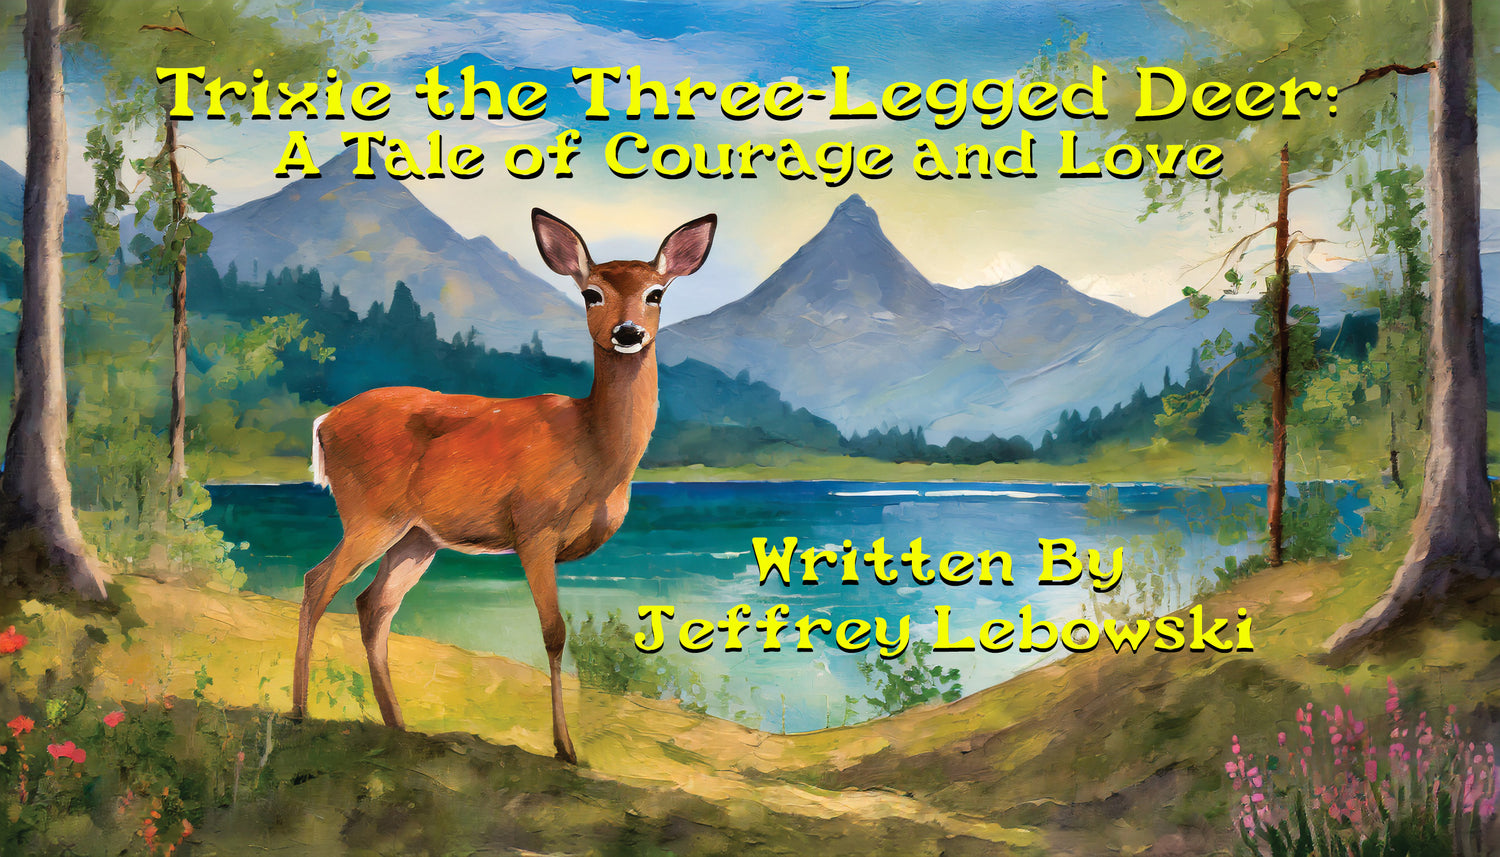 Trixie the Three-Legged Deer: A Tale of Courage and Love - The Dude Abides